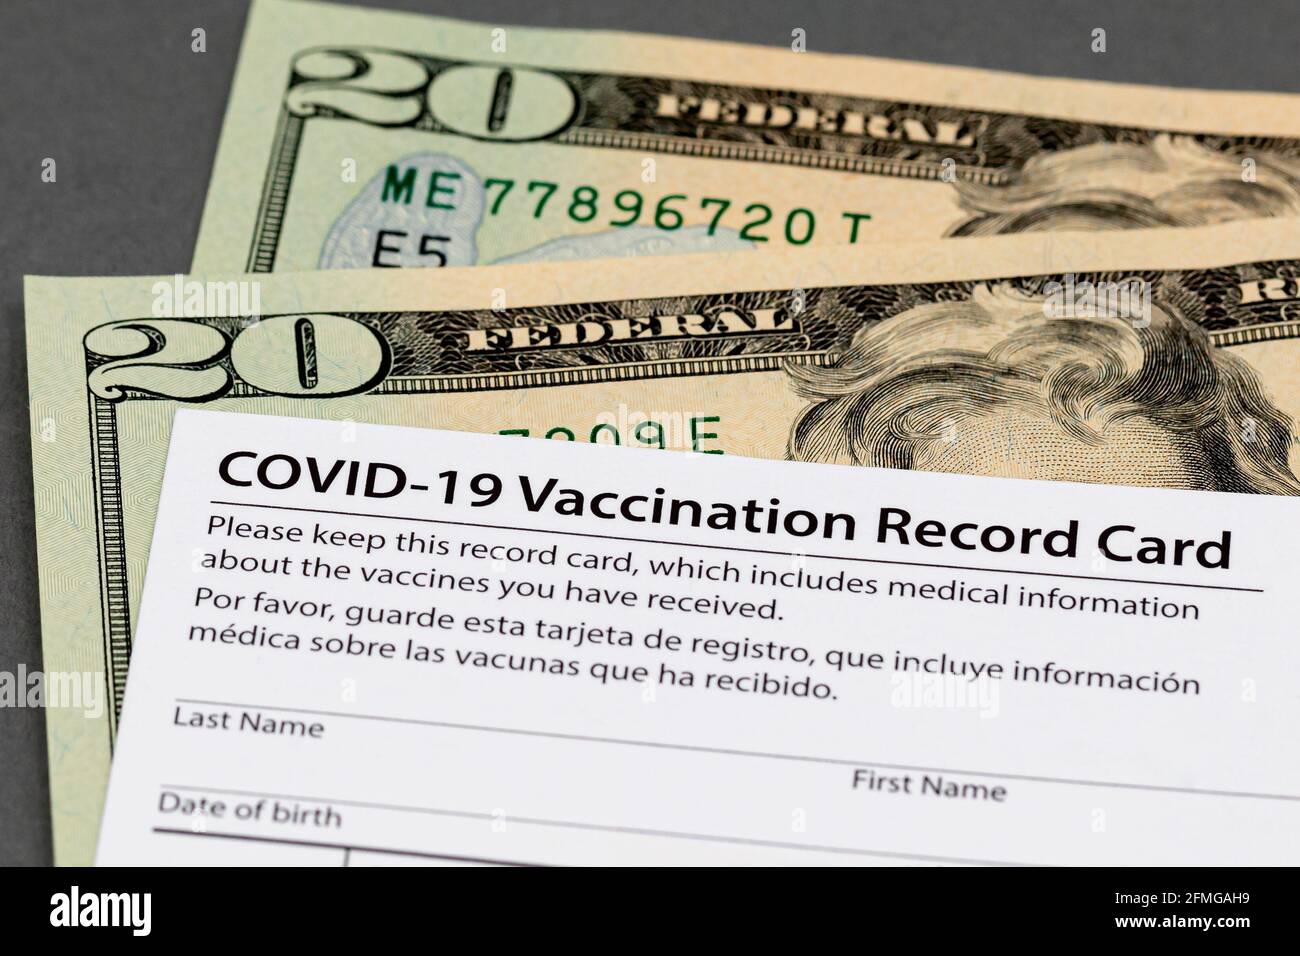 Covid-19 vaccination record card and cash money. Fake, vaccine card fraud and forgery concept Stock Photo